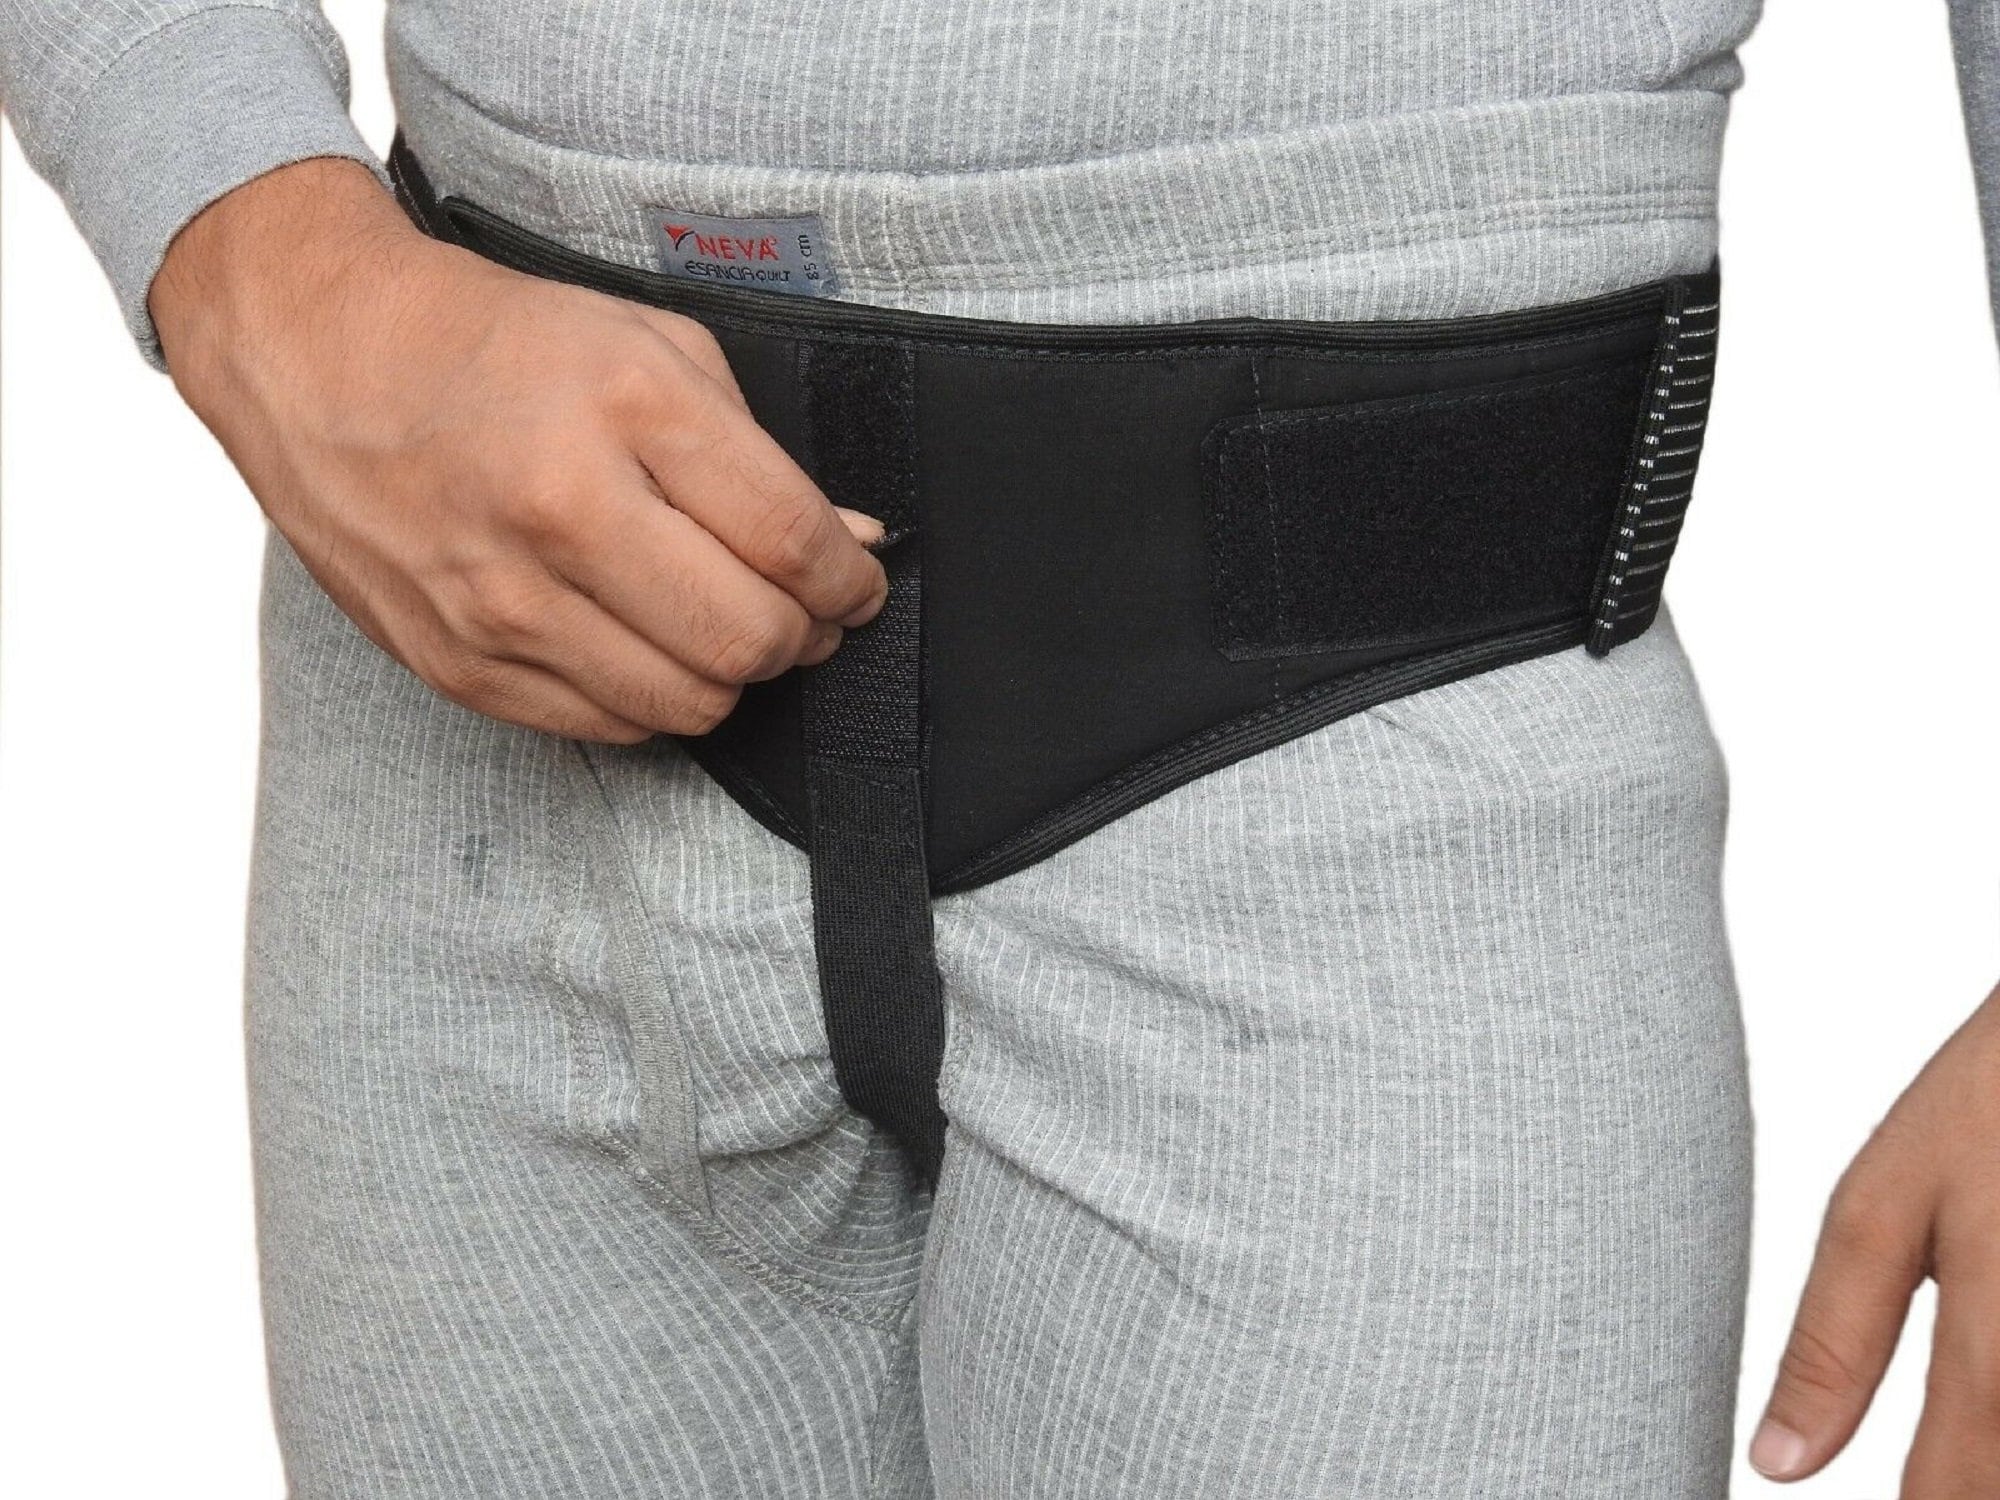 Single Side Hernia Belt Left Side Select Inguinal Groin Hernia Support  Truss Brace FREE SHIPPING, Black Hernia Belt for Pain Relief -  Canada